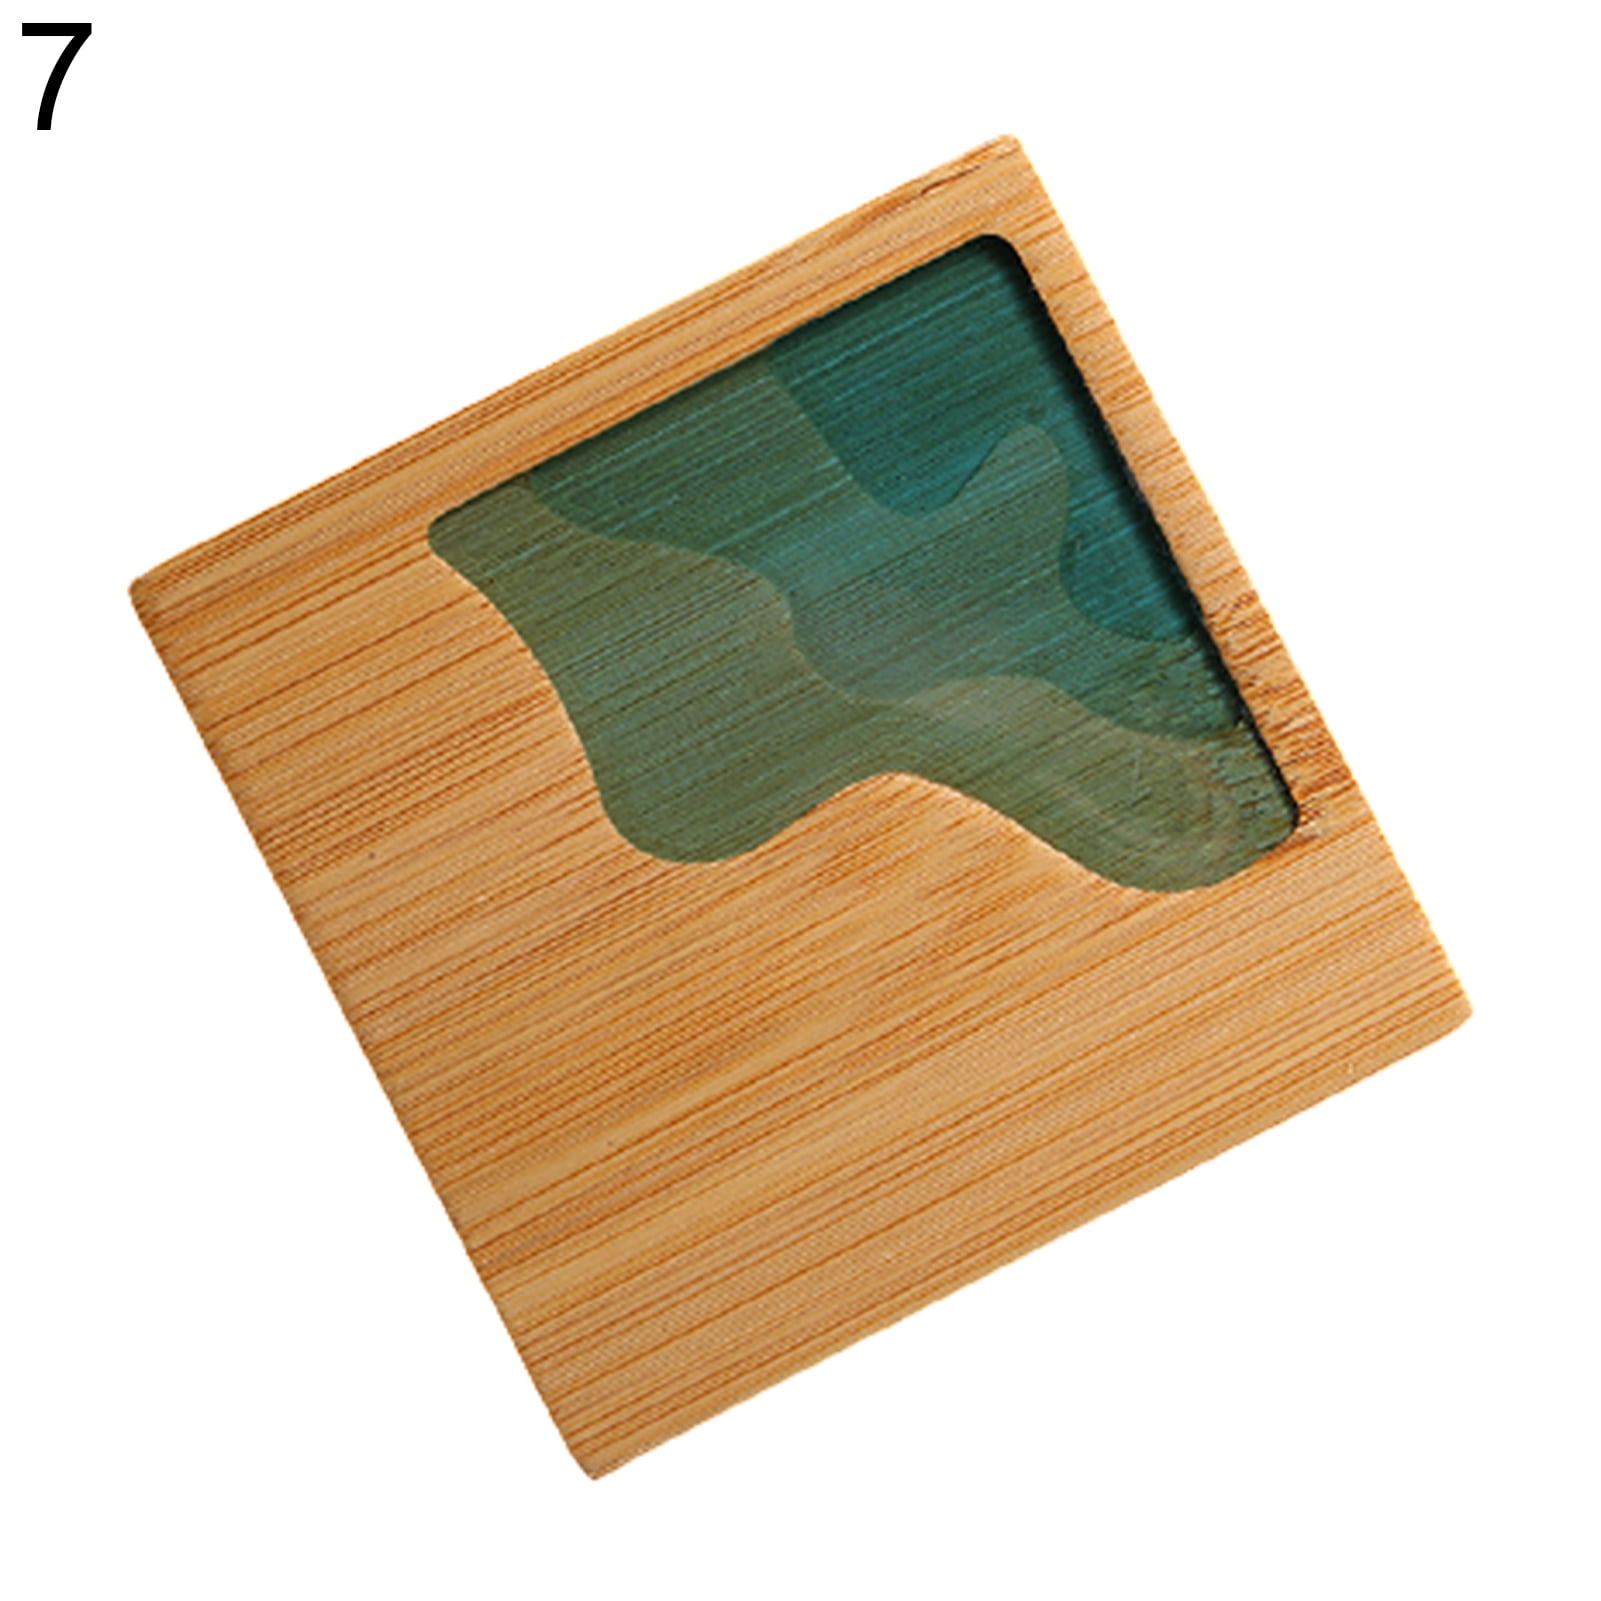 Aveco Creative Epoxy Transparent Gradient Blue Bamboo Round Tea Resin Wood  Coasters for Tea Ceremony Accessories - China Coaster and Teacup Mat price